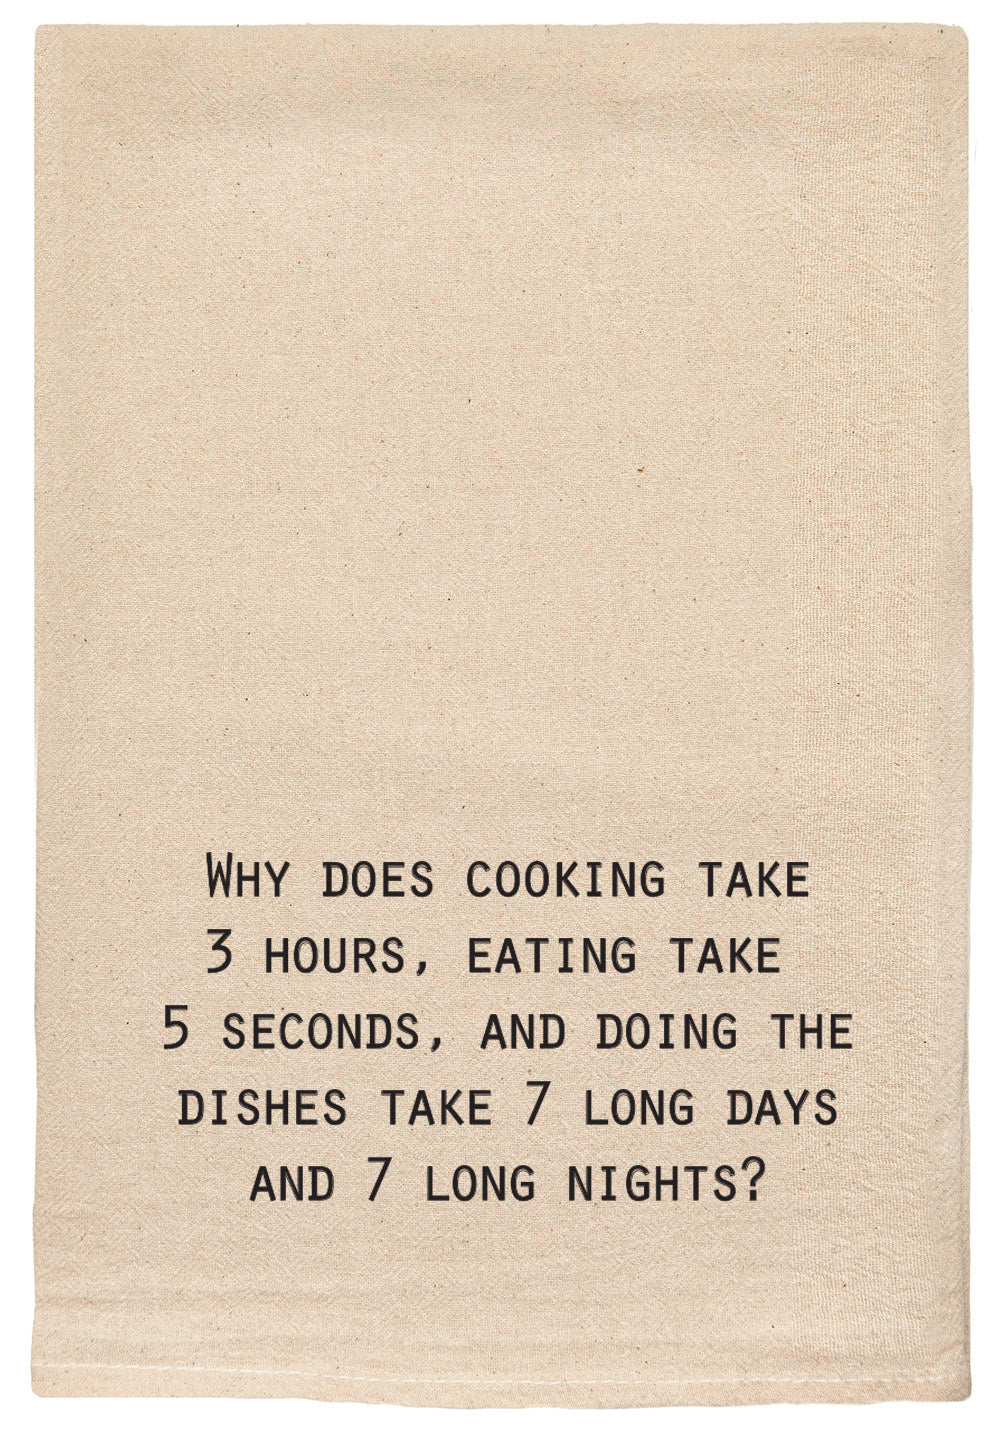 Why does cooking take 3 hours, eating take 5 seconds, and doing the dishes take 7 long days and 7 long nights?